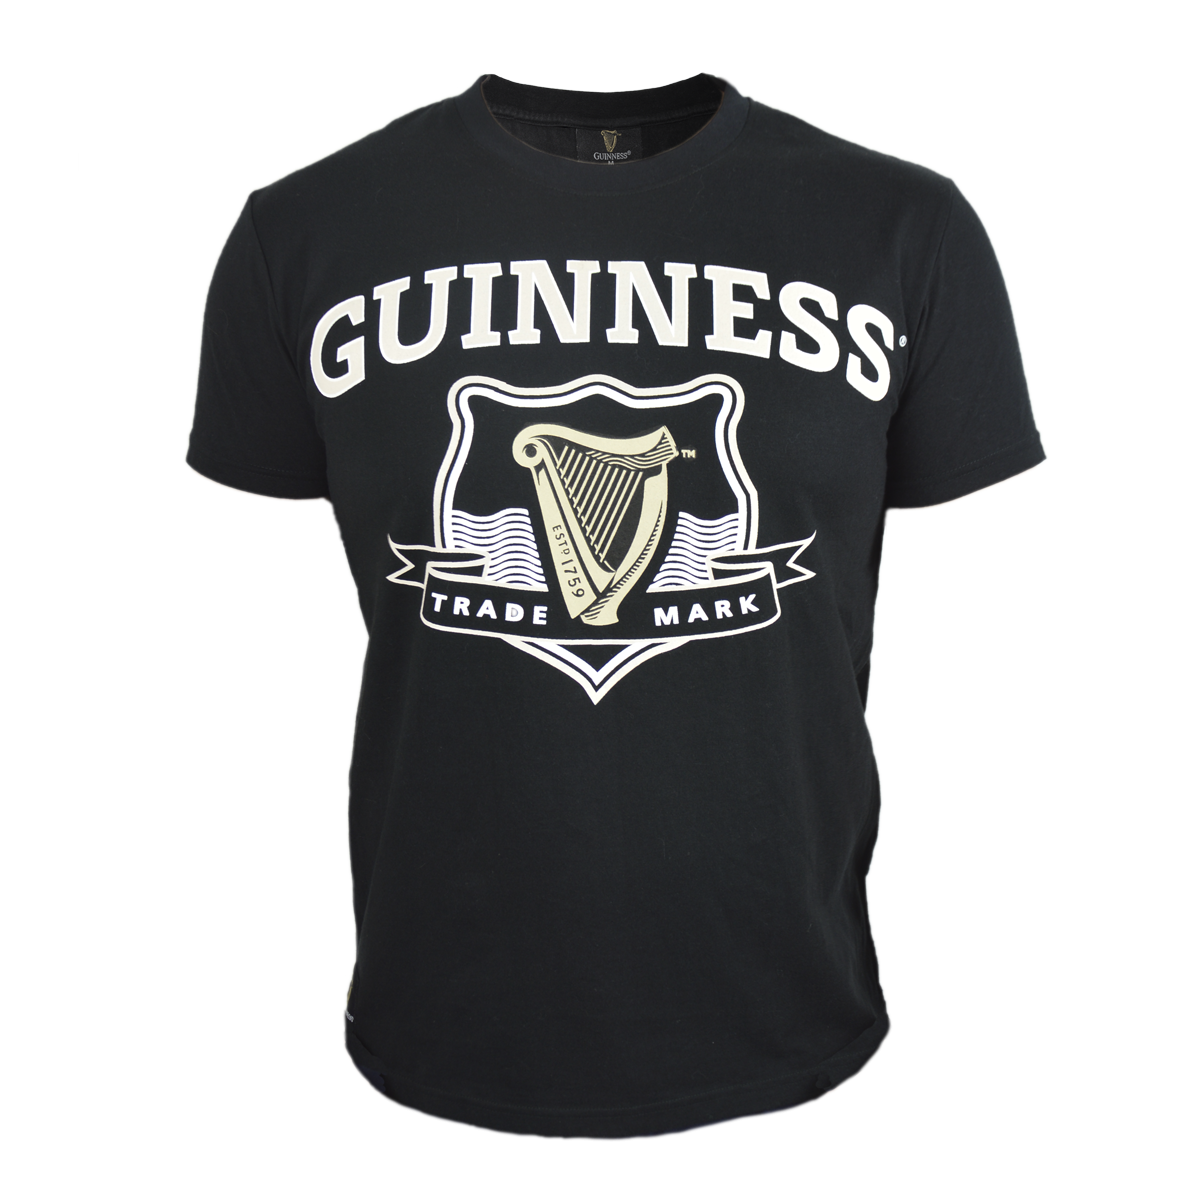 Guinness UK's Guinness Black Trademark Label T-Shirt, made of 100% cotton, features the Guinness Trademark logo.